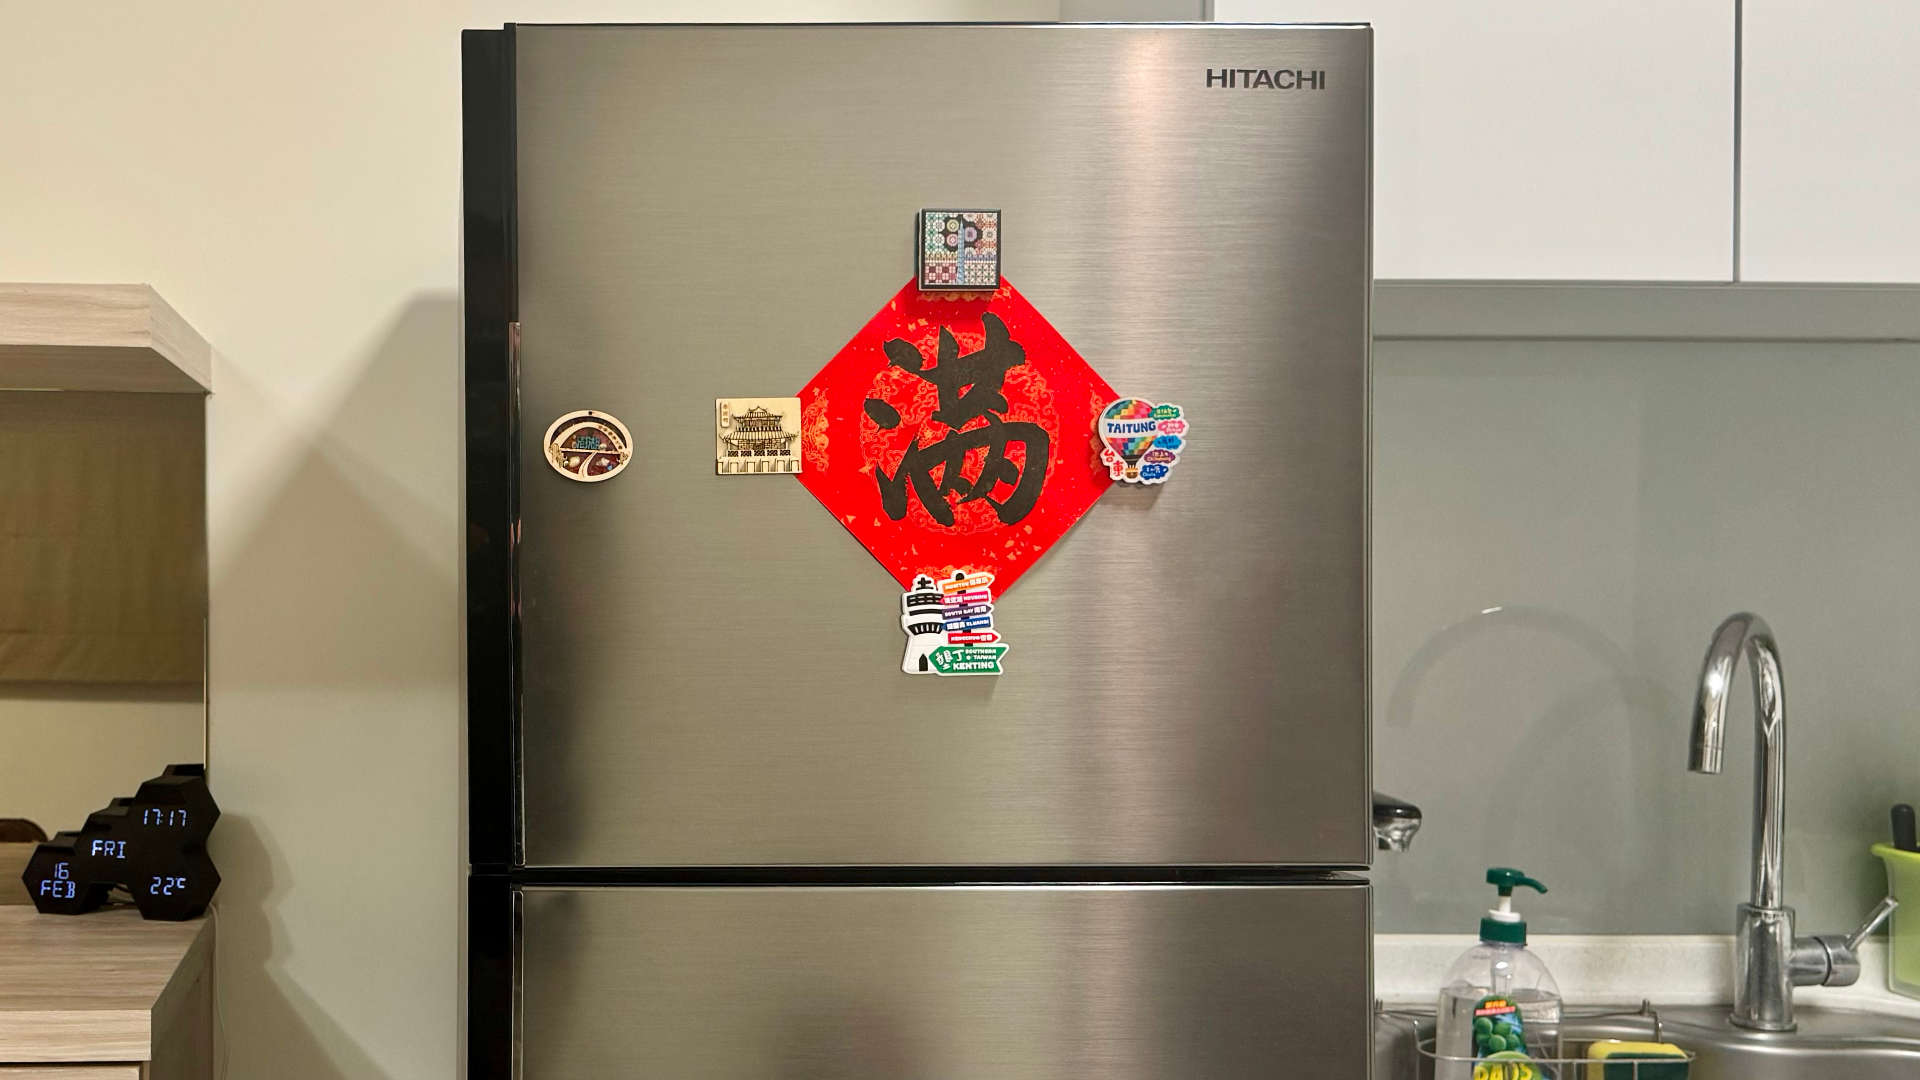 A diamond-shaped piece of paper with a large Chinese character in the middle, affixed to a stainless steel refrigerator by magnets.